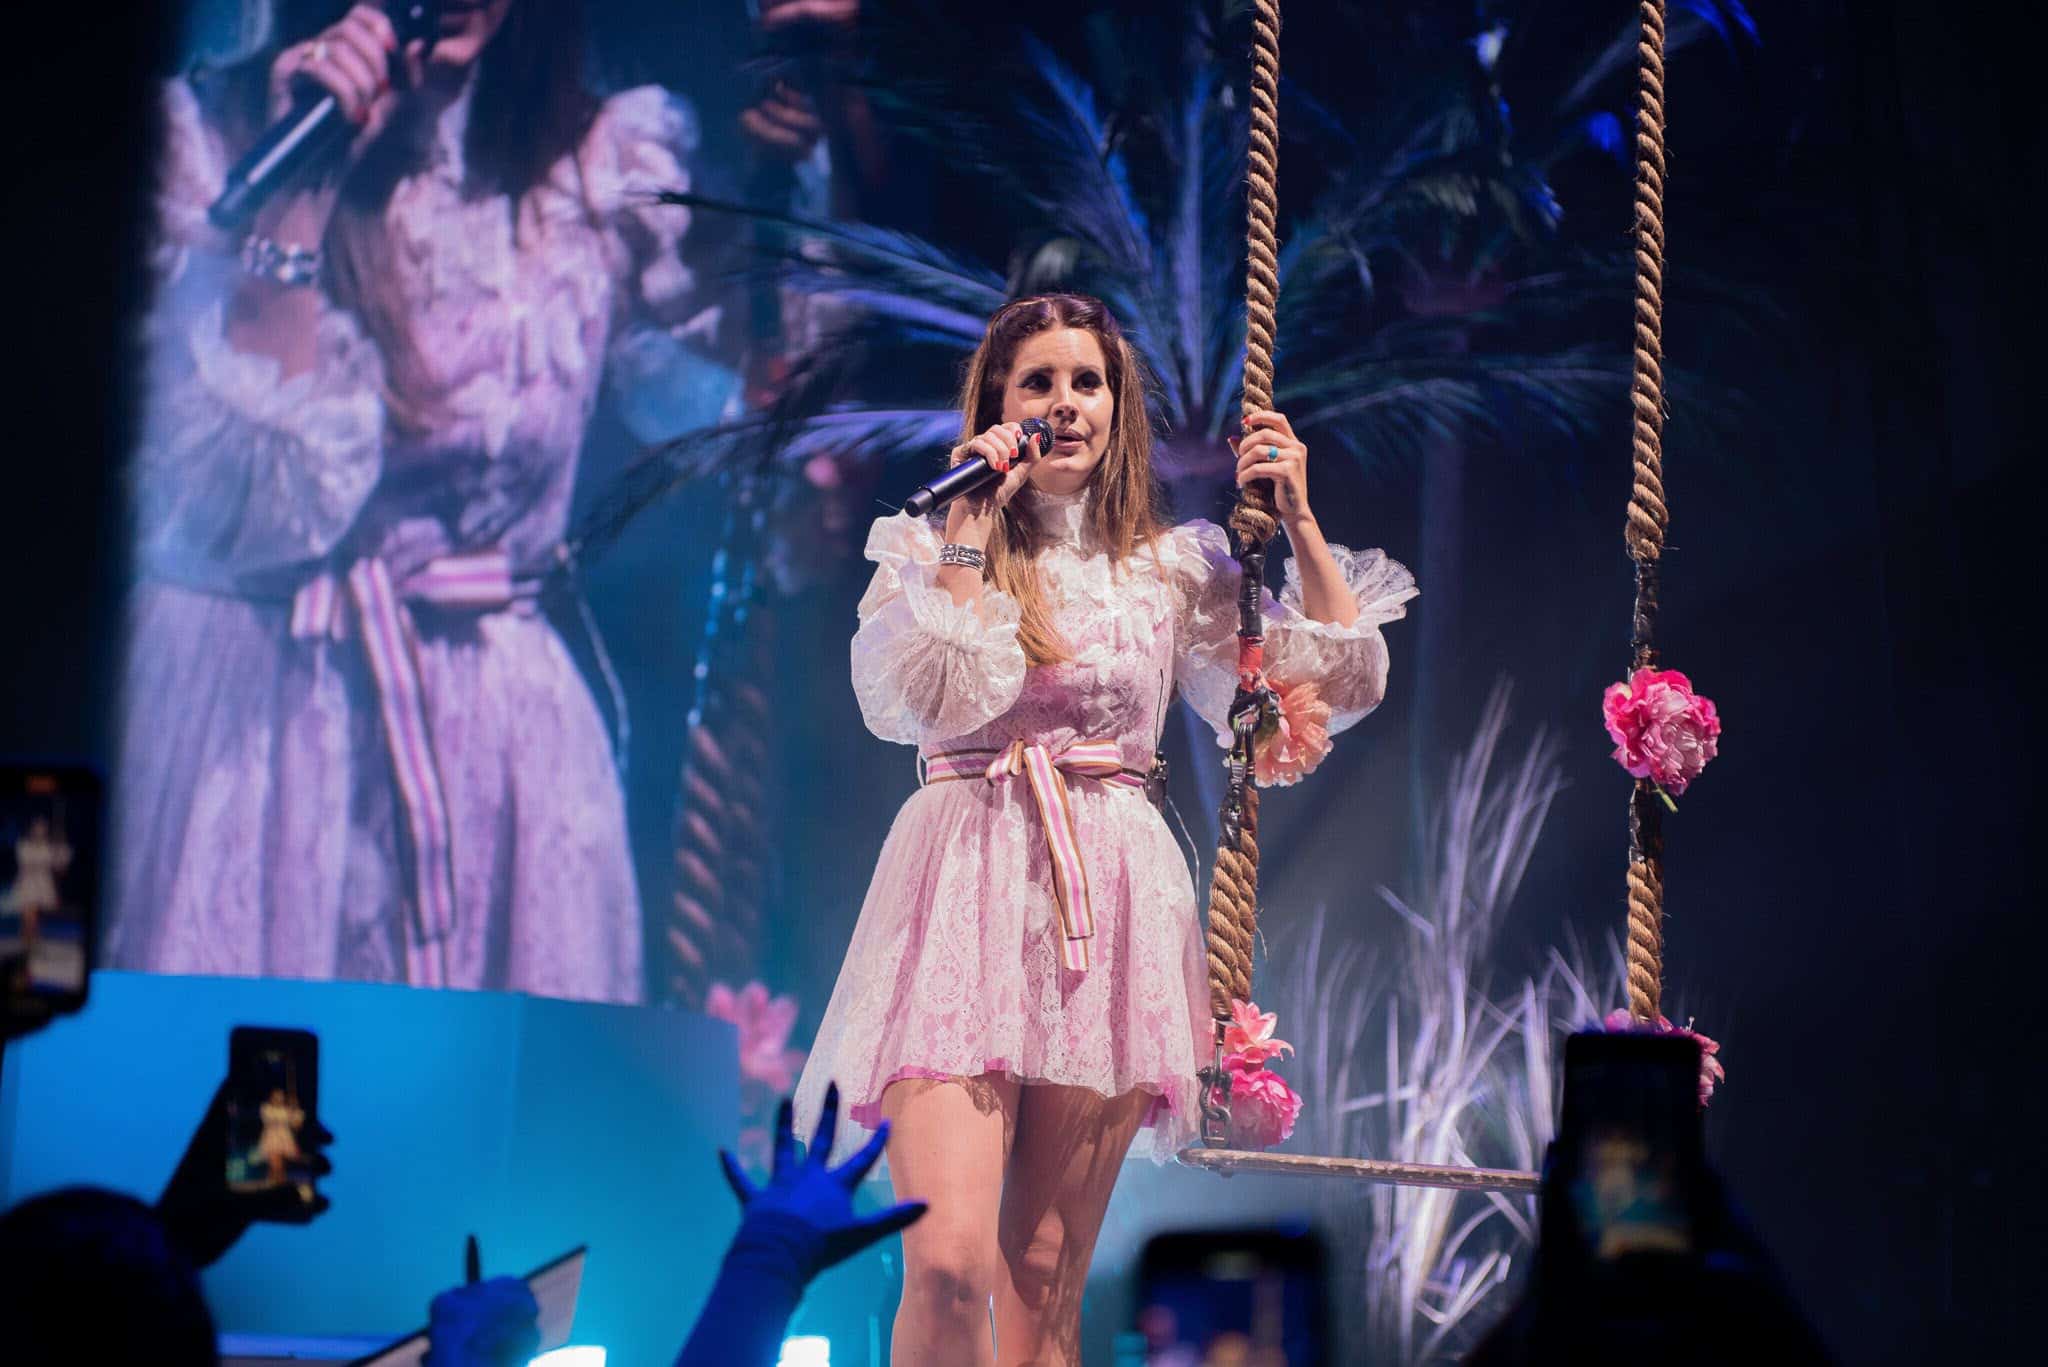 The 10 best Lana Del Ray songs of all time